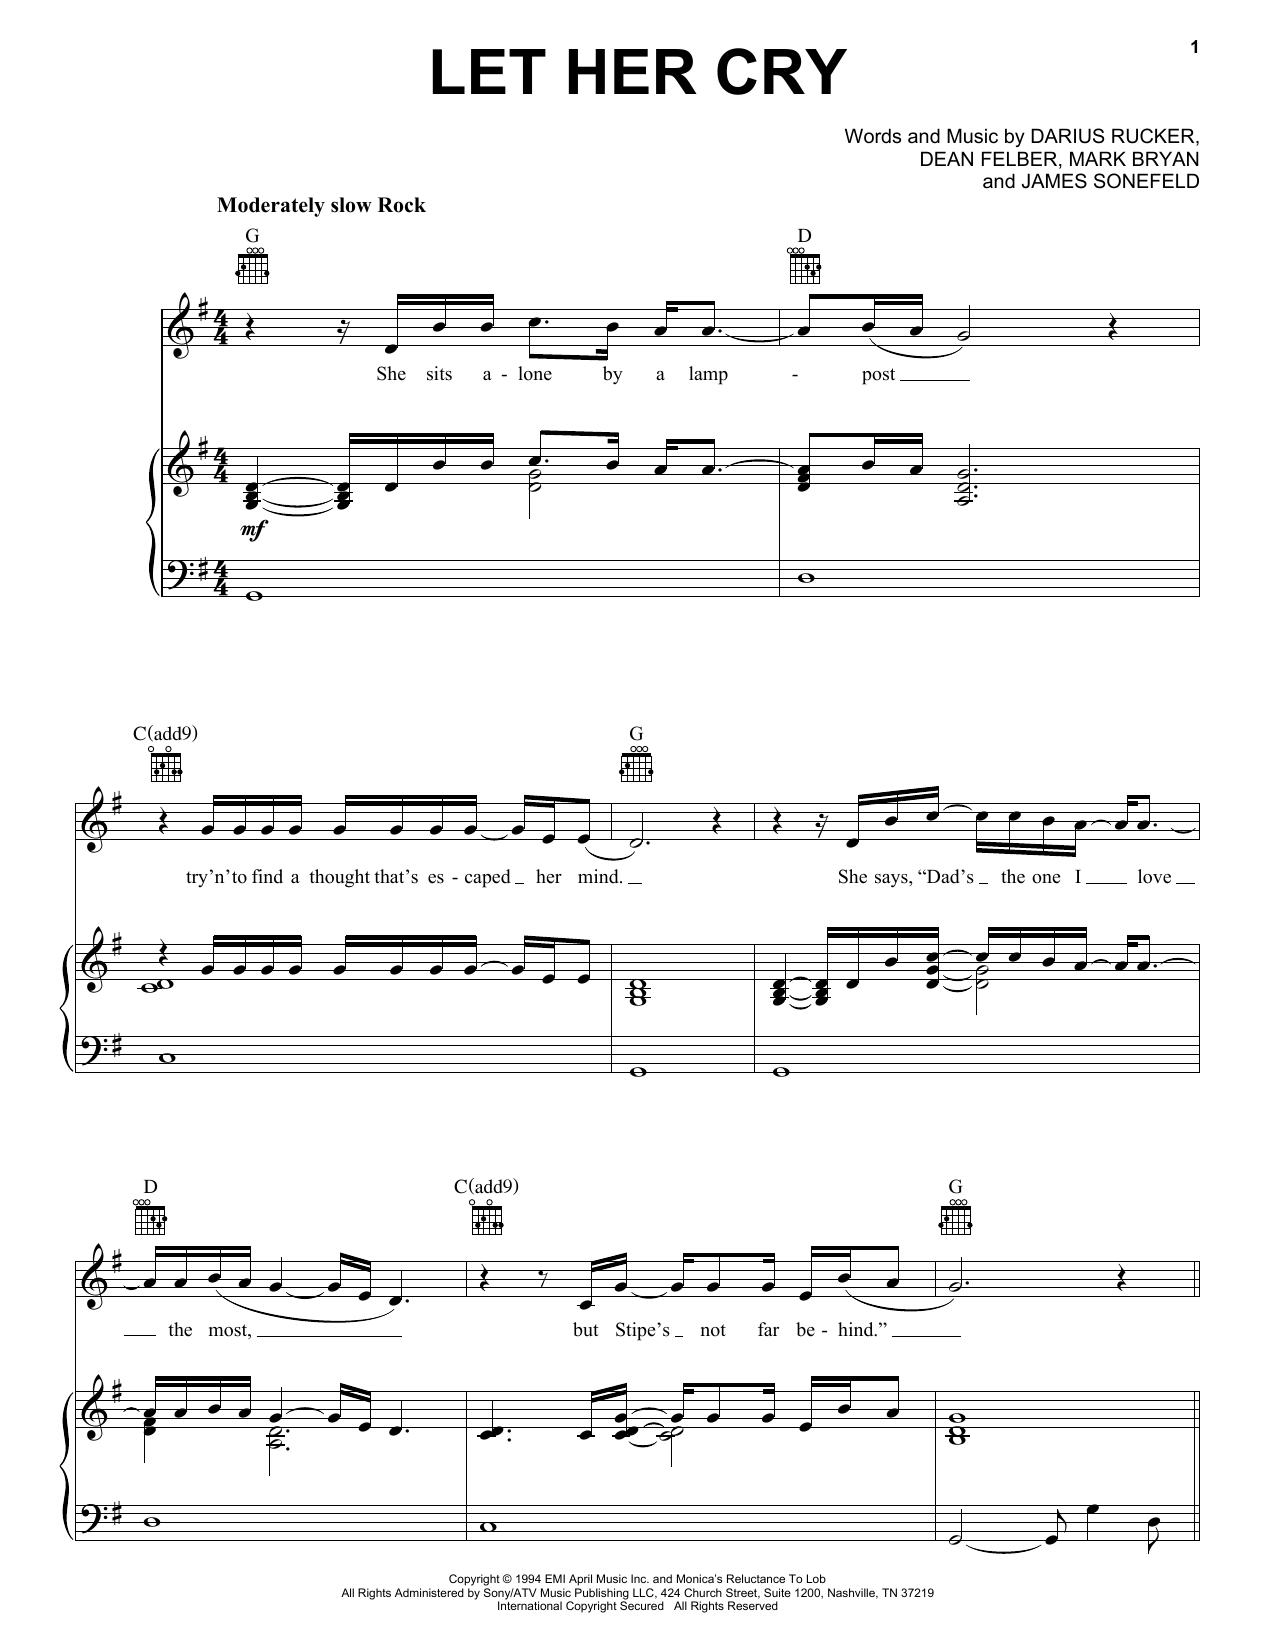 Hootie & The Blowfish Let Her Cry sheet music notes printable PDF score